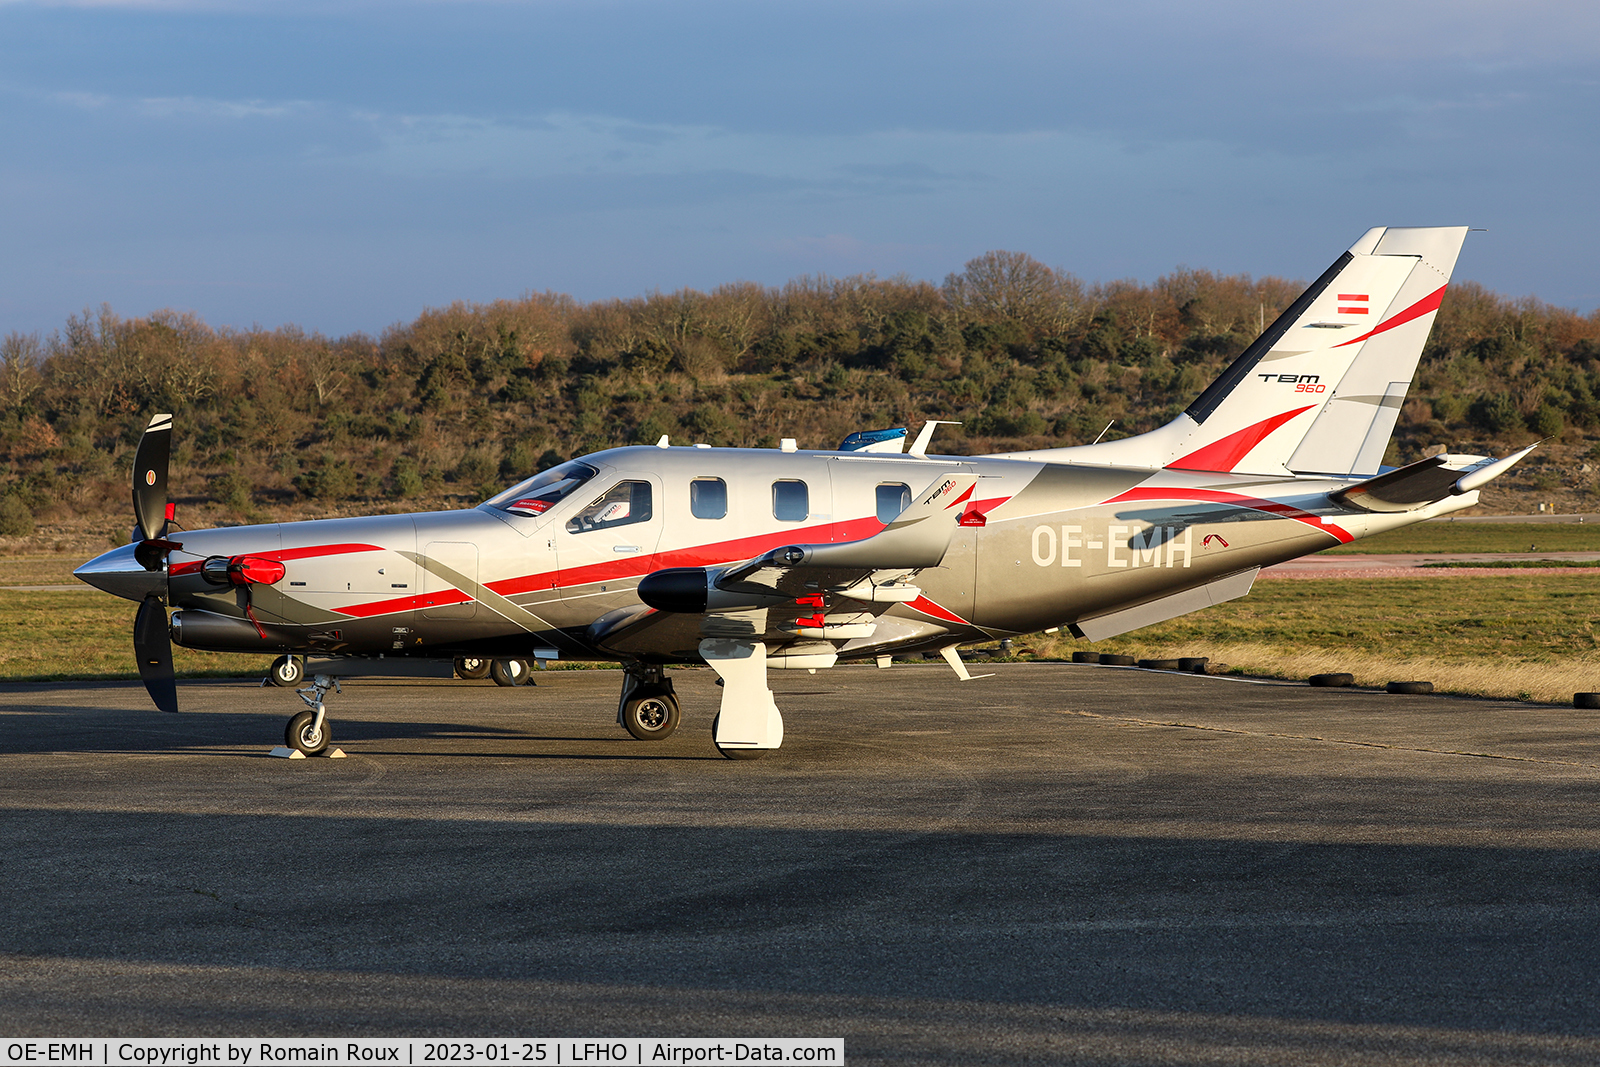 OE-EMH, 2022 Daher TBM-960 C/N 1448, Parked, from Linz (LOWL)